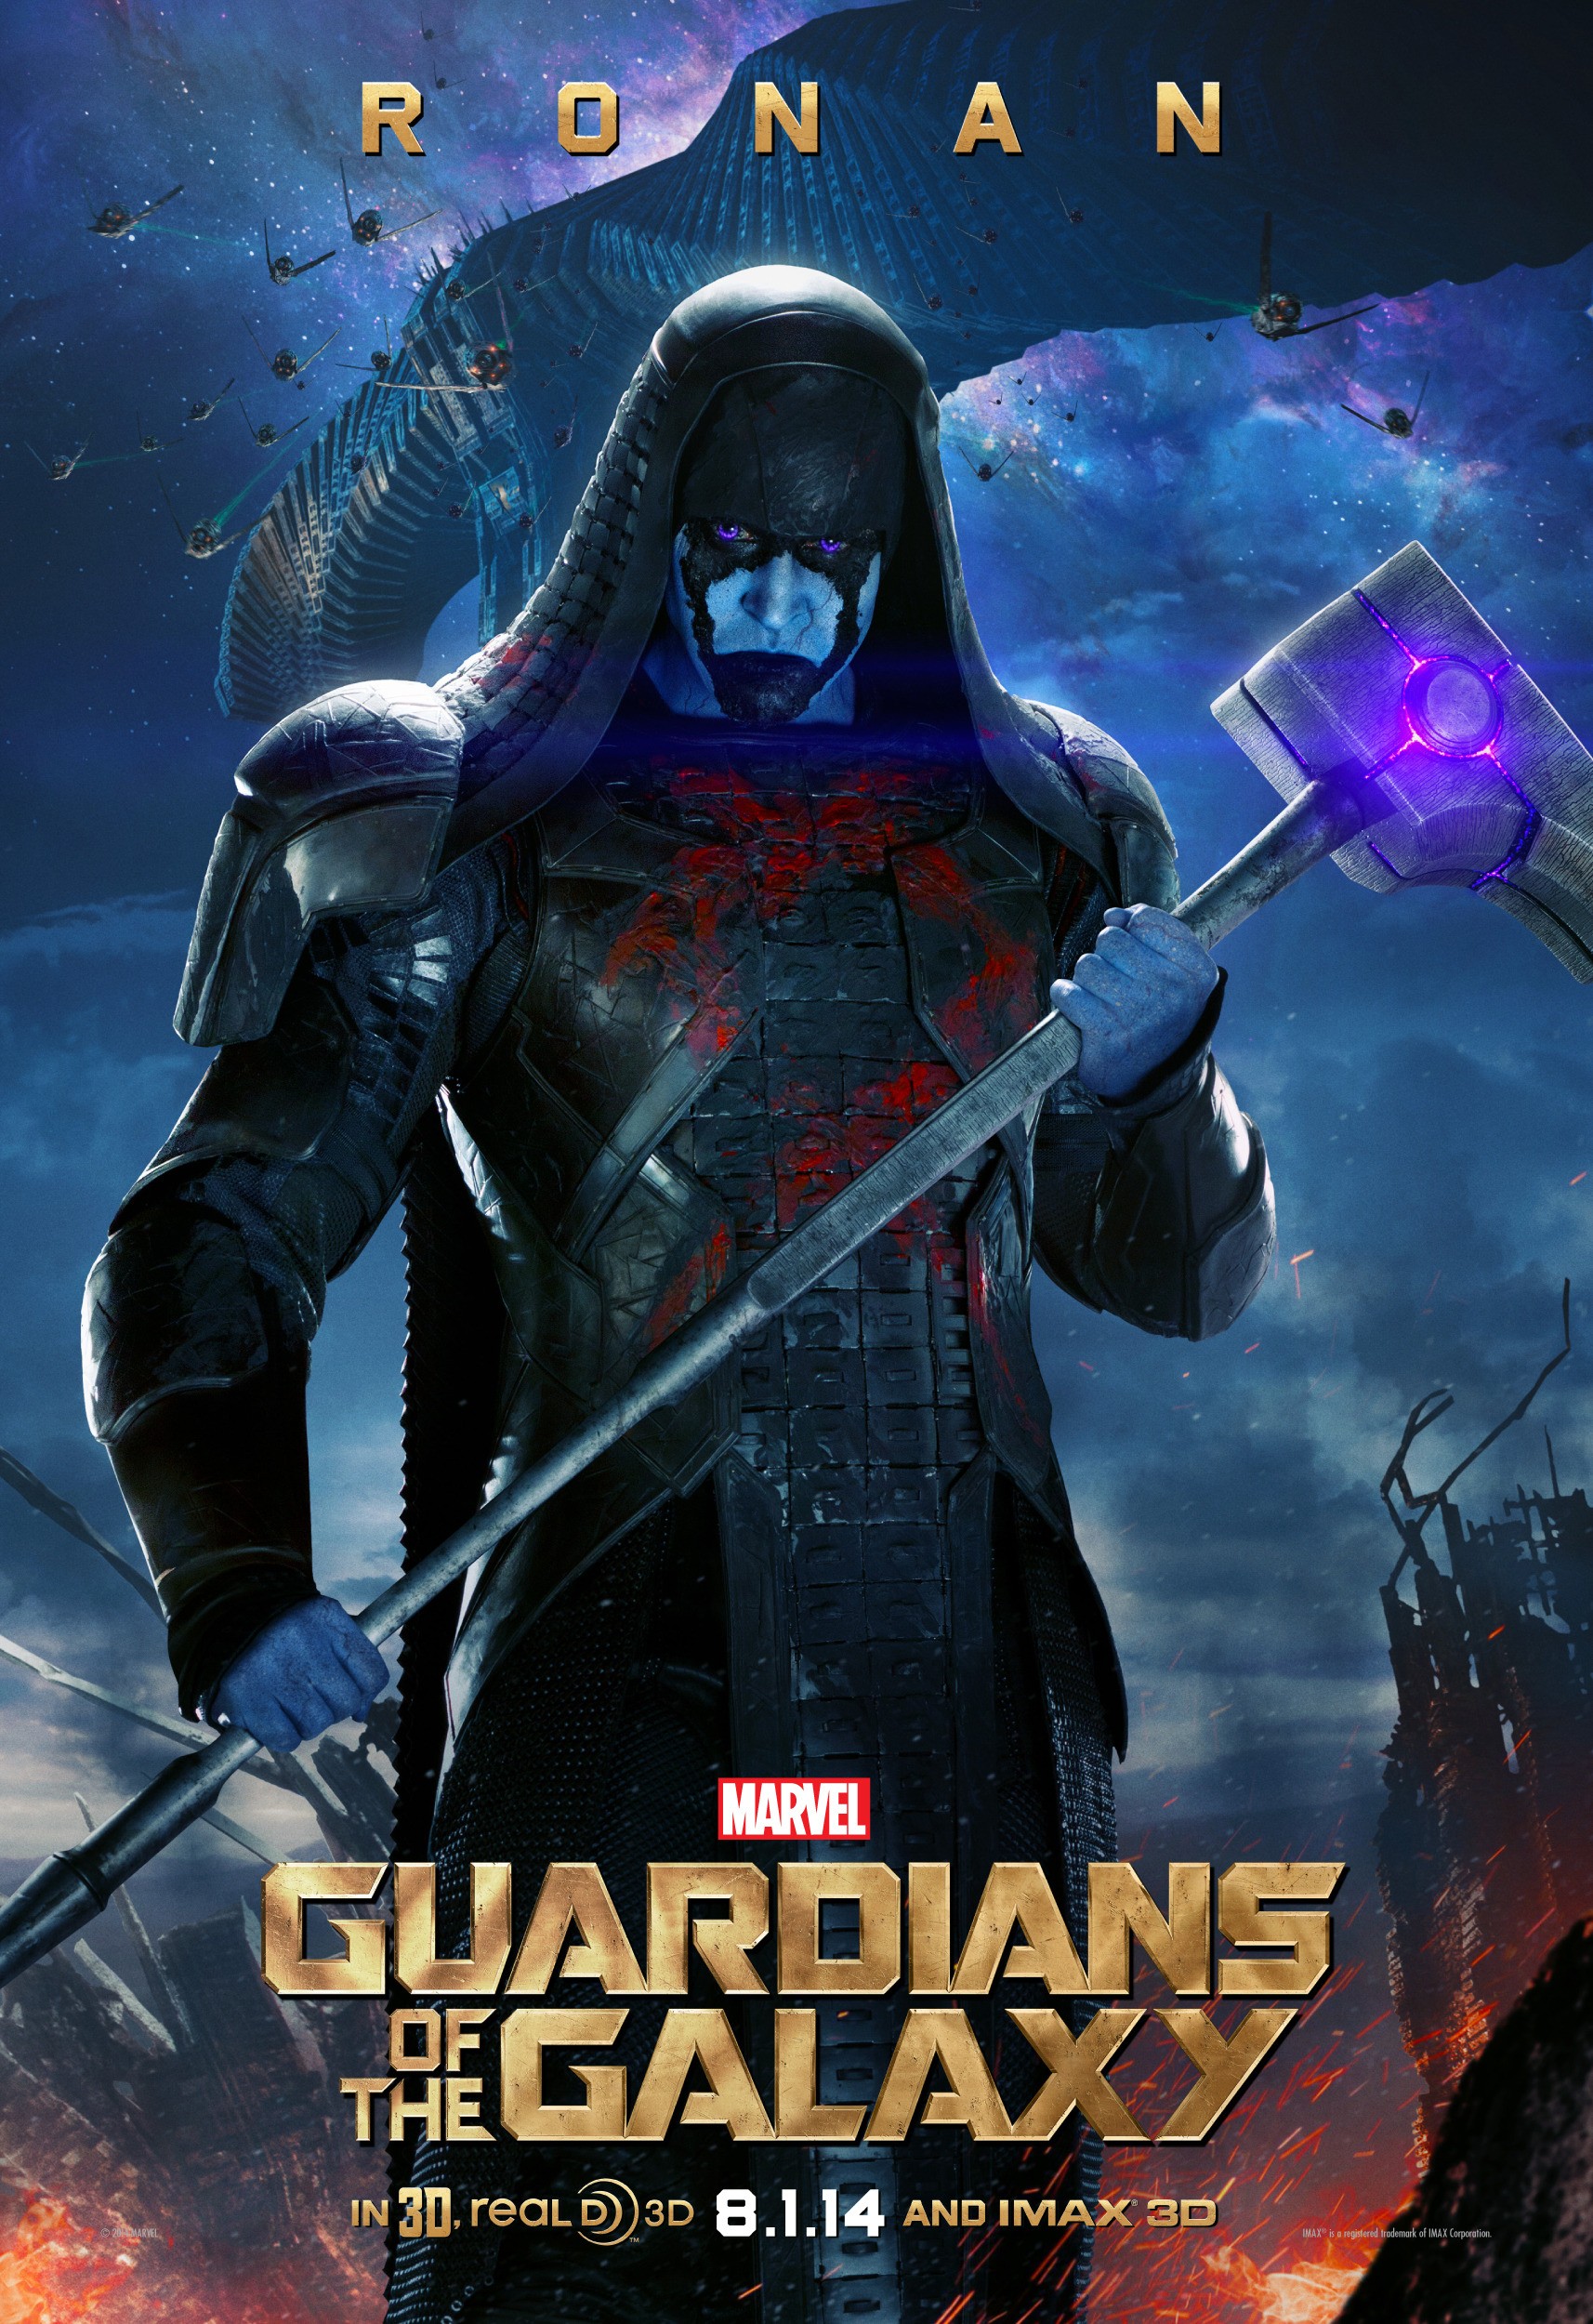 Mega Sized Movie Poster Image for Guardians of the Galaxy (#19 of 23)